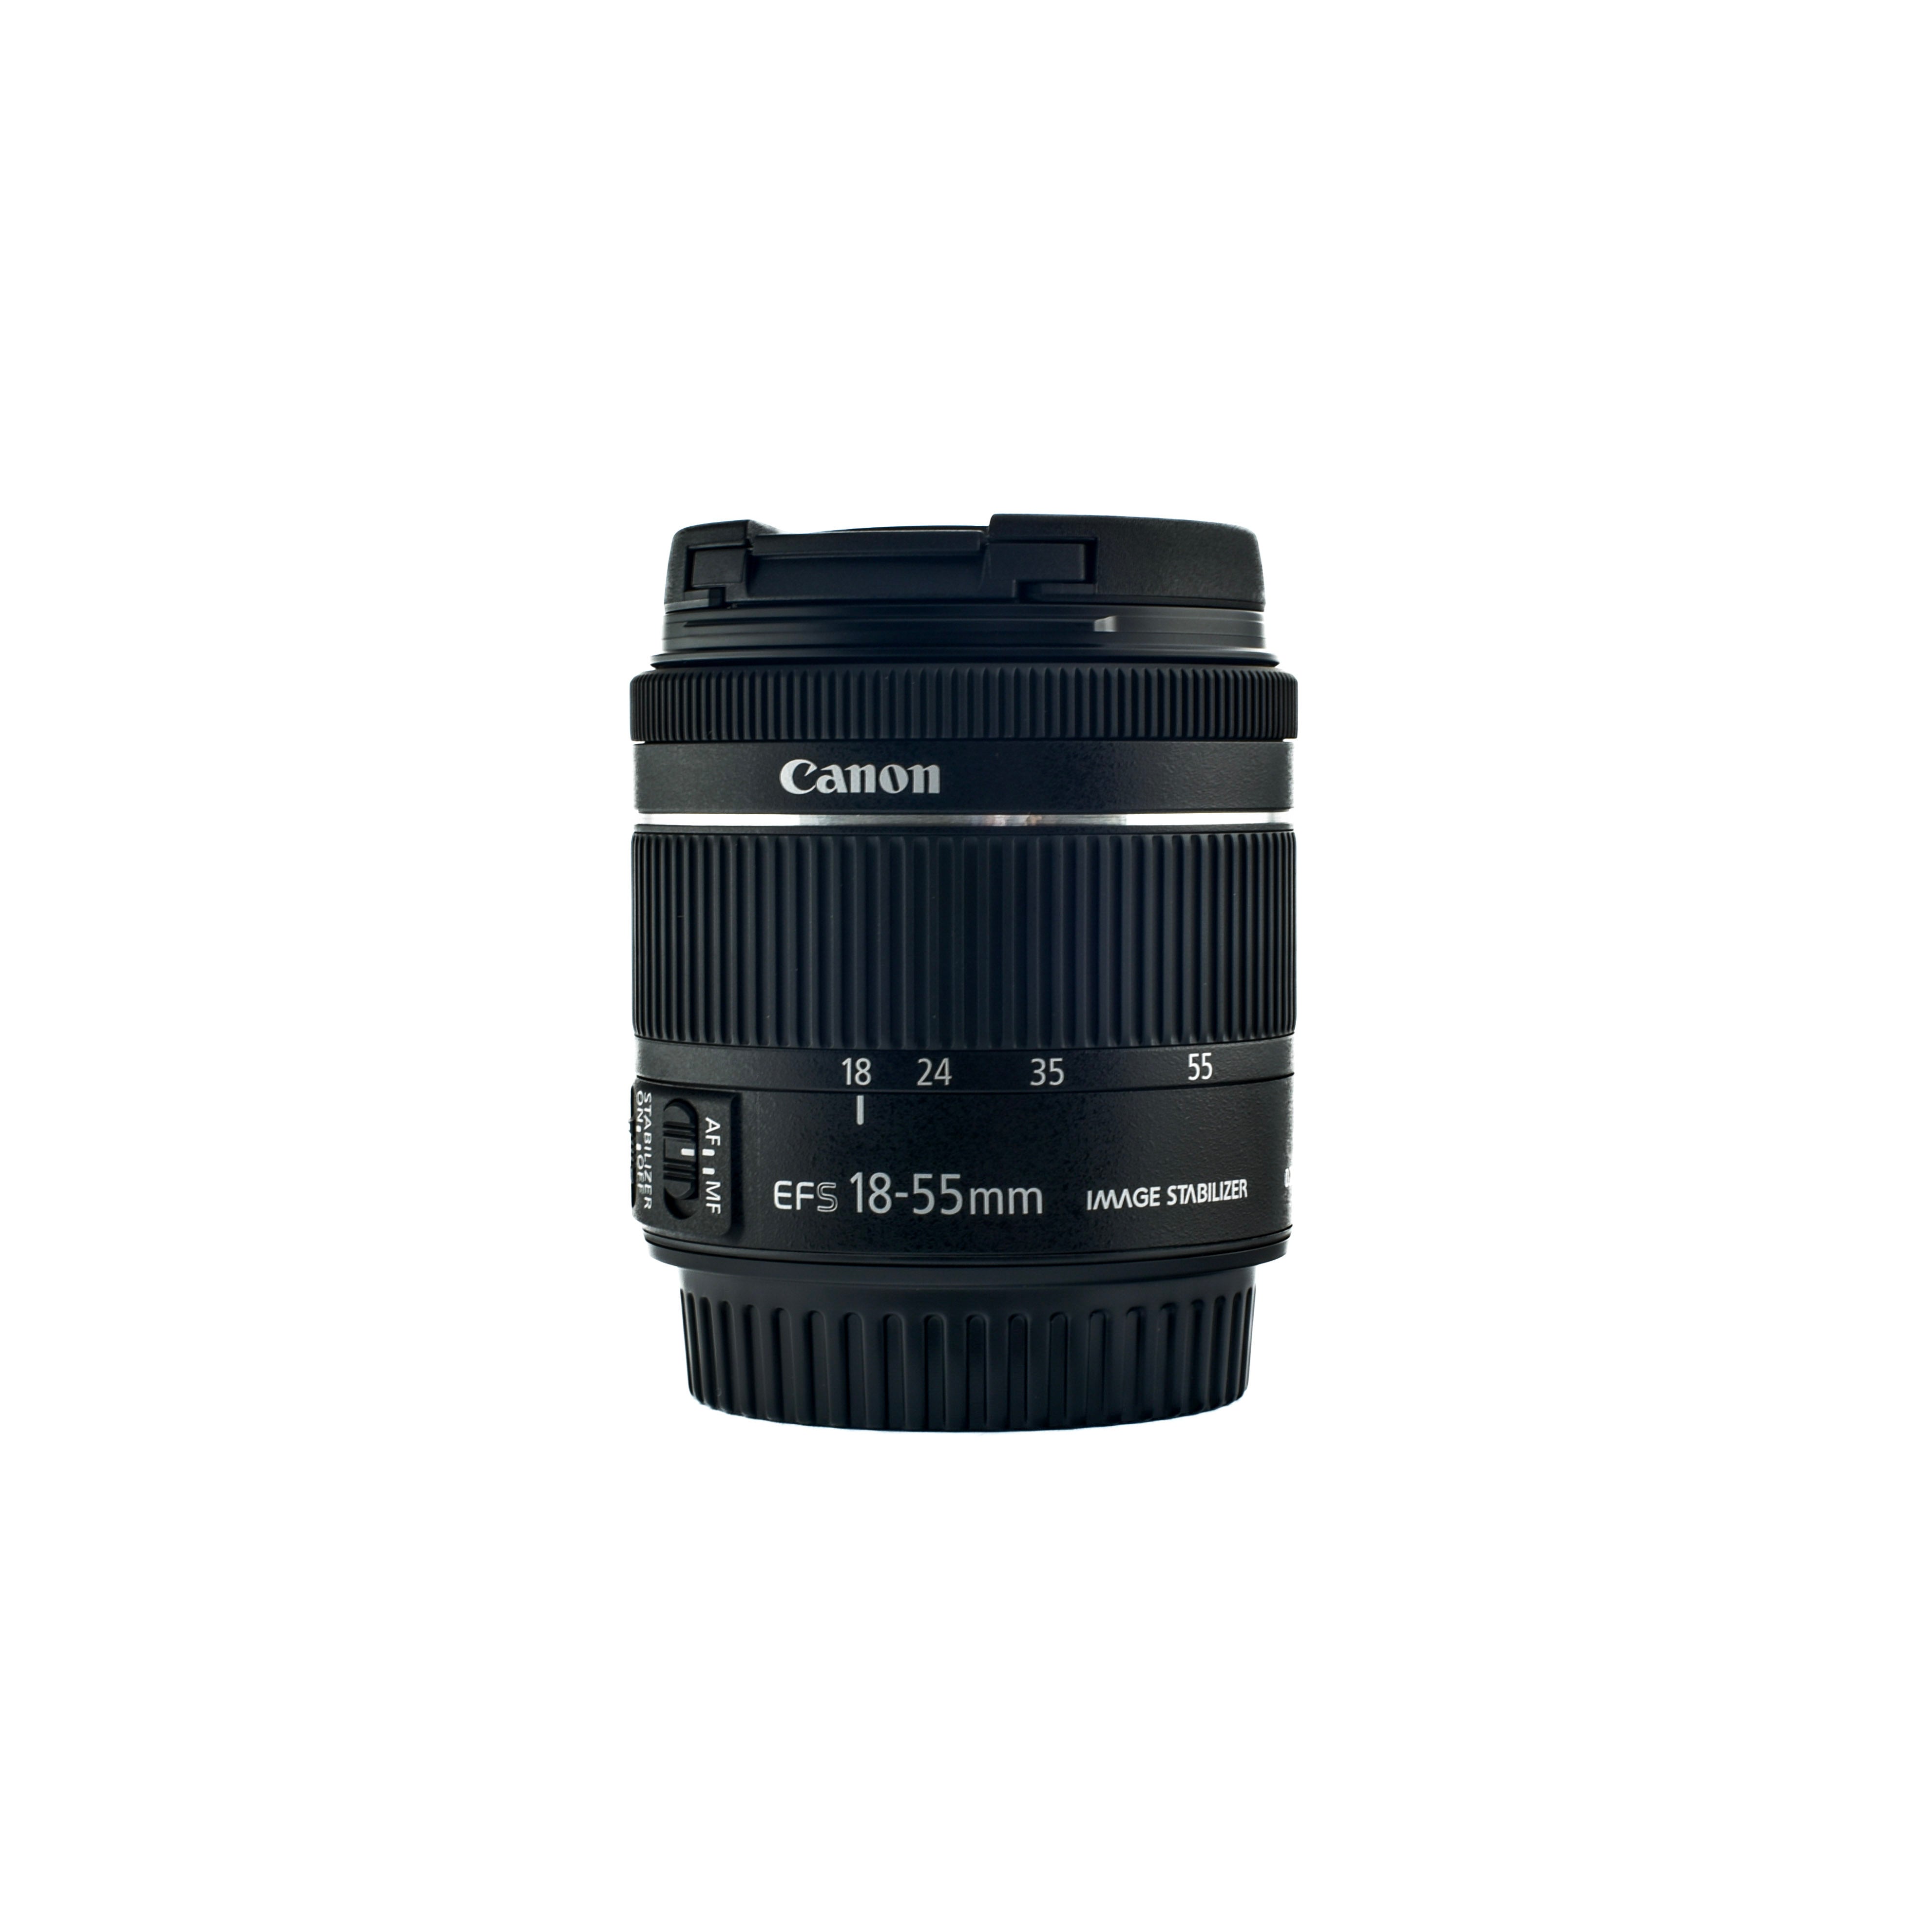 Canon EF-S 18-55mm f/3.5-5.6 IS  lens